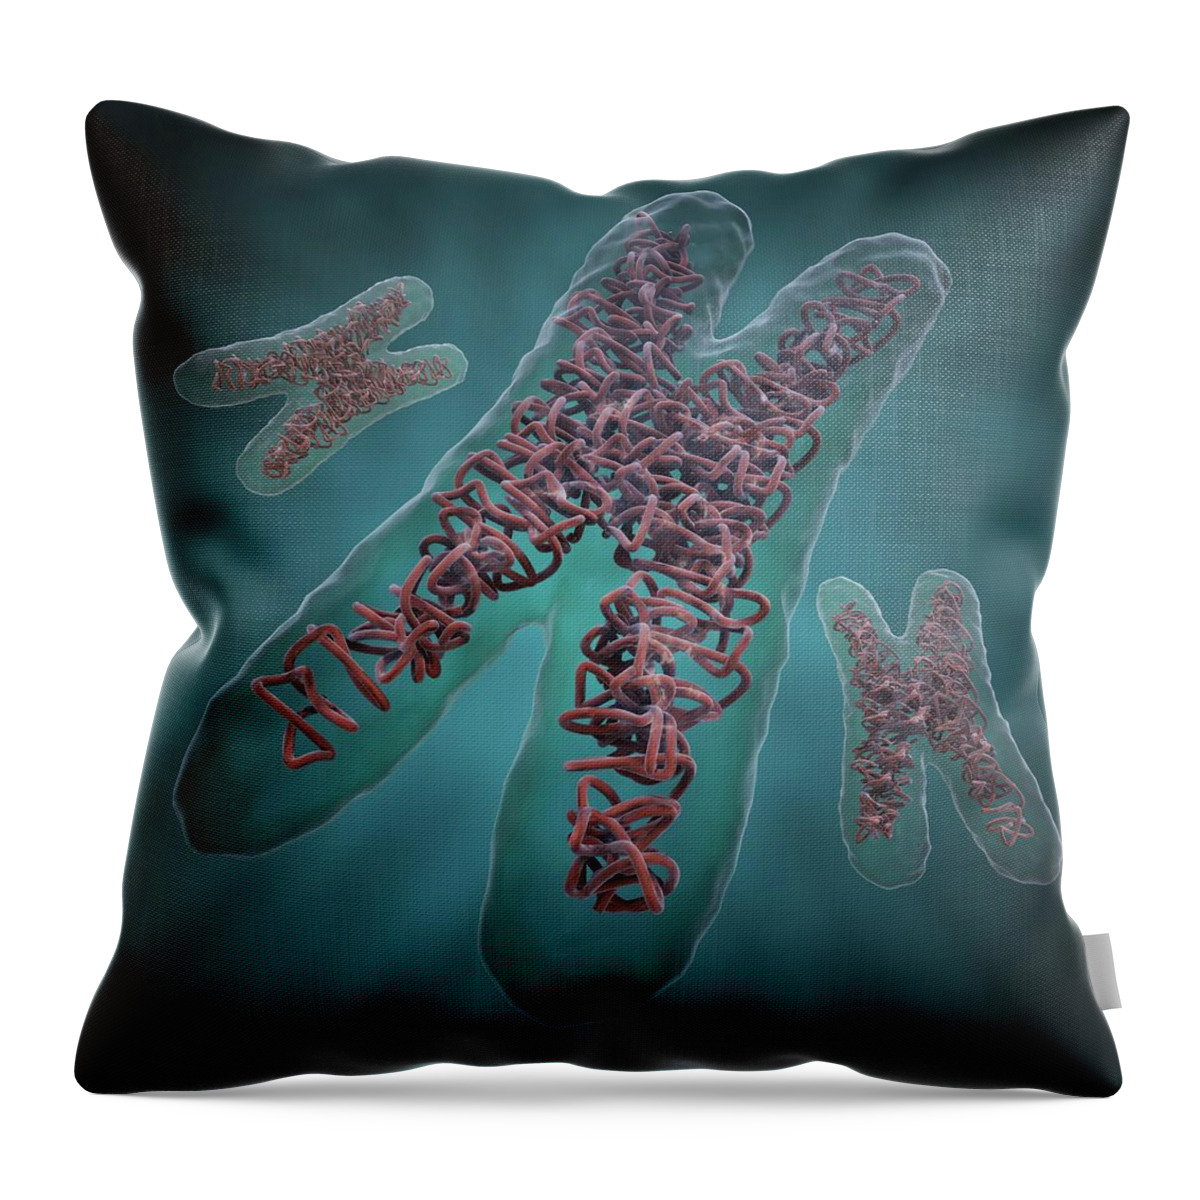 Physiology Throw Pillow featuring the digital art Chromosomes, Artwork #1 by Science Photo Library - Andrzej Wojcicki